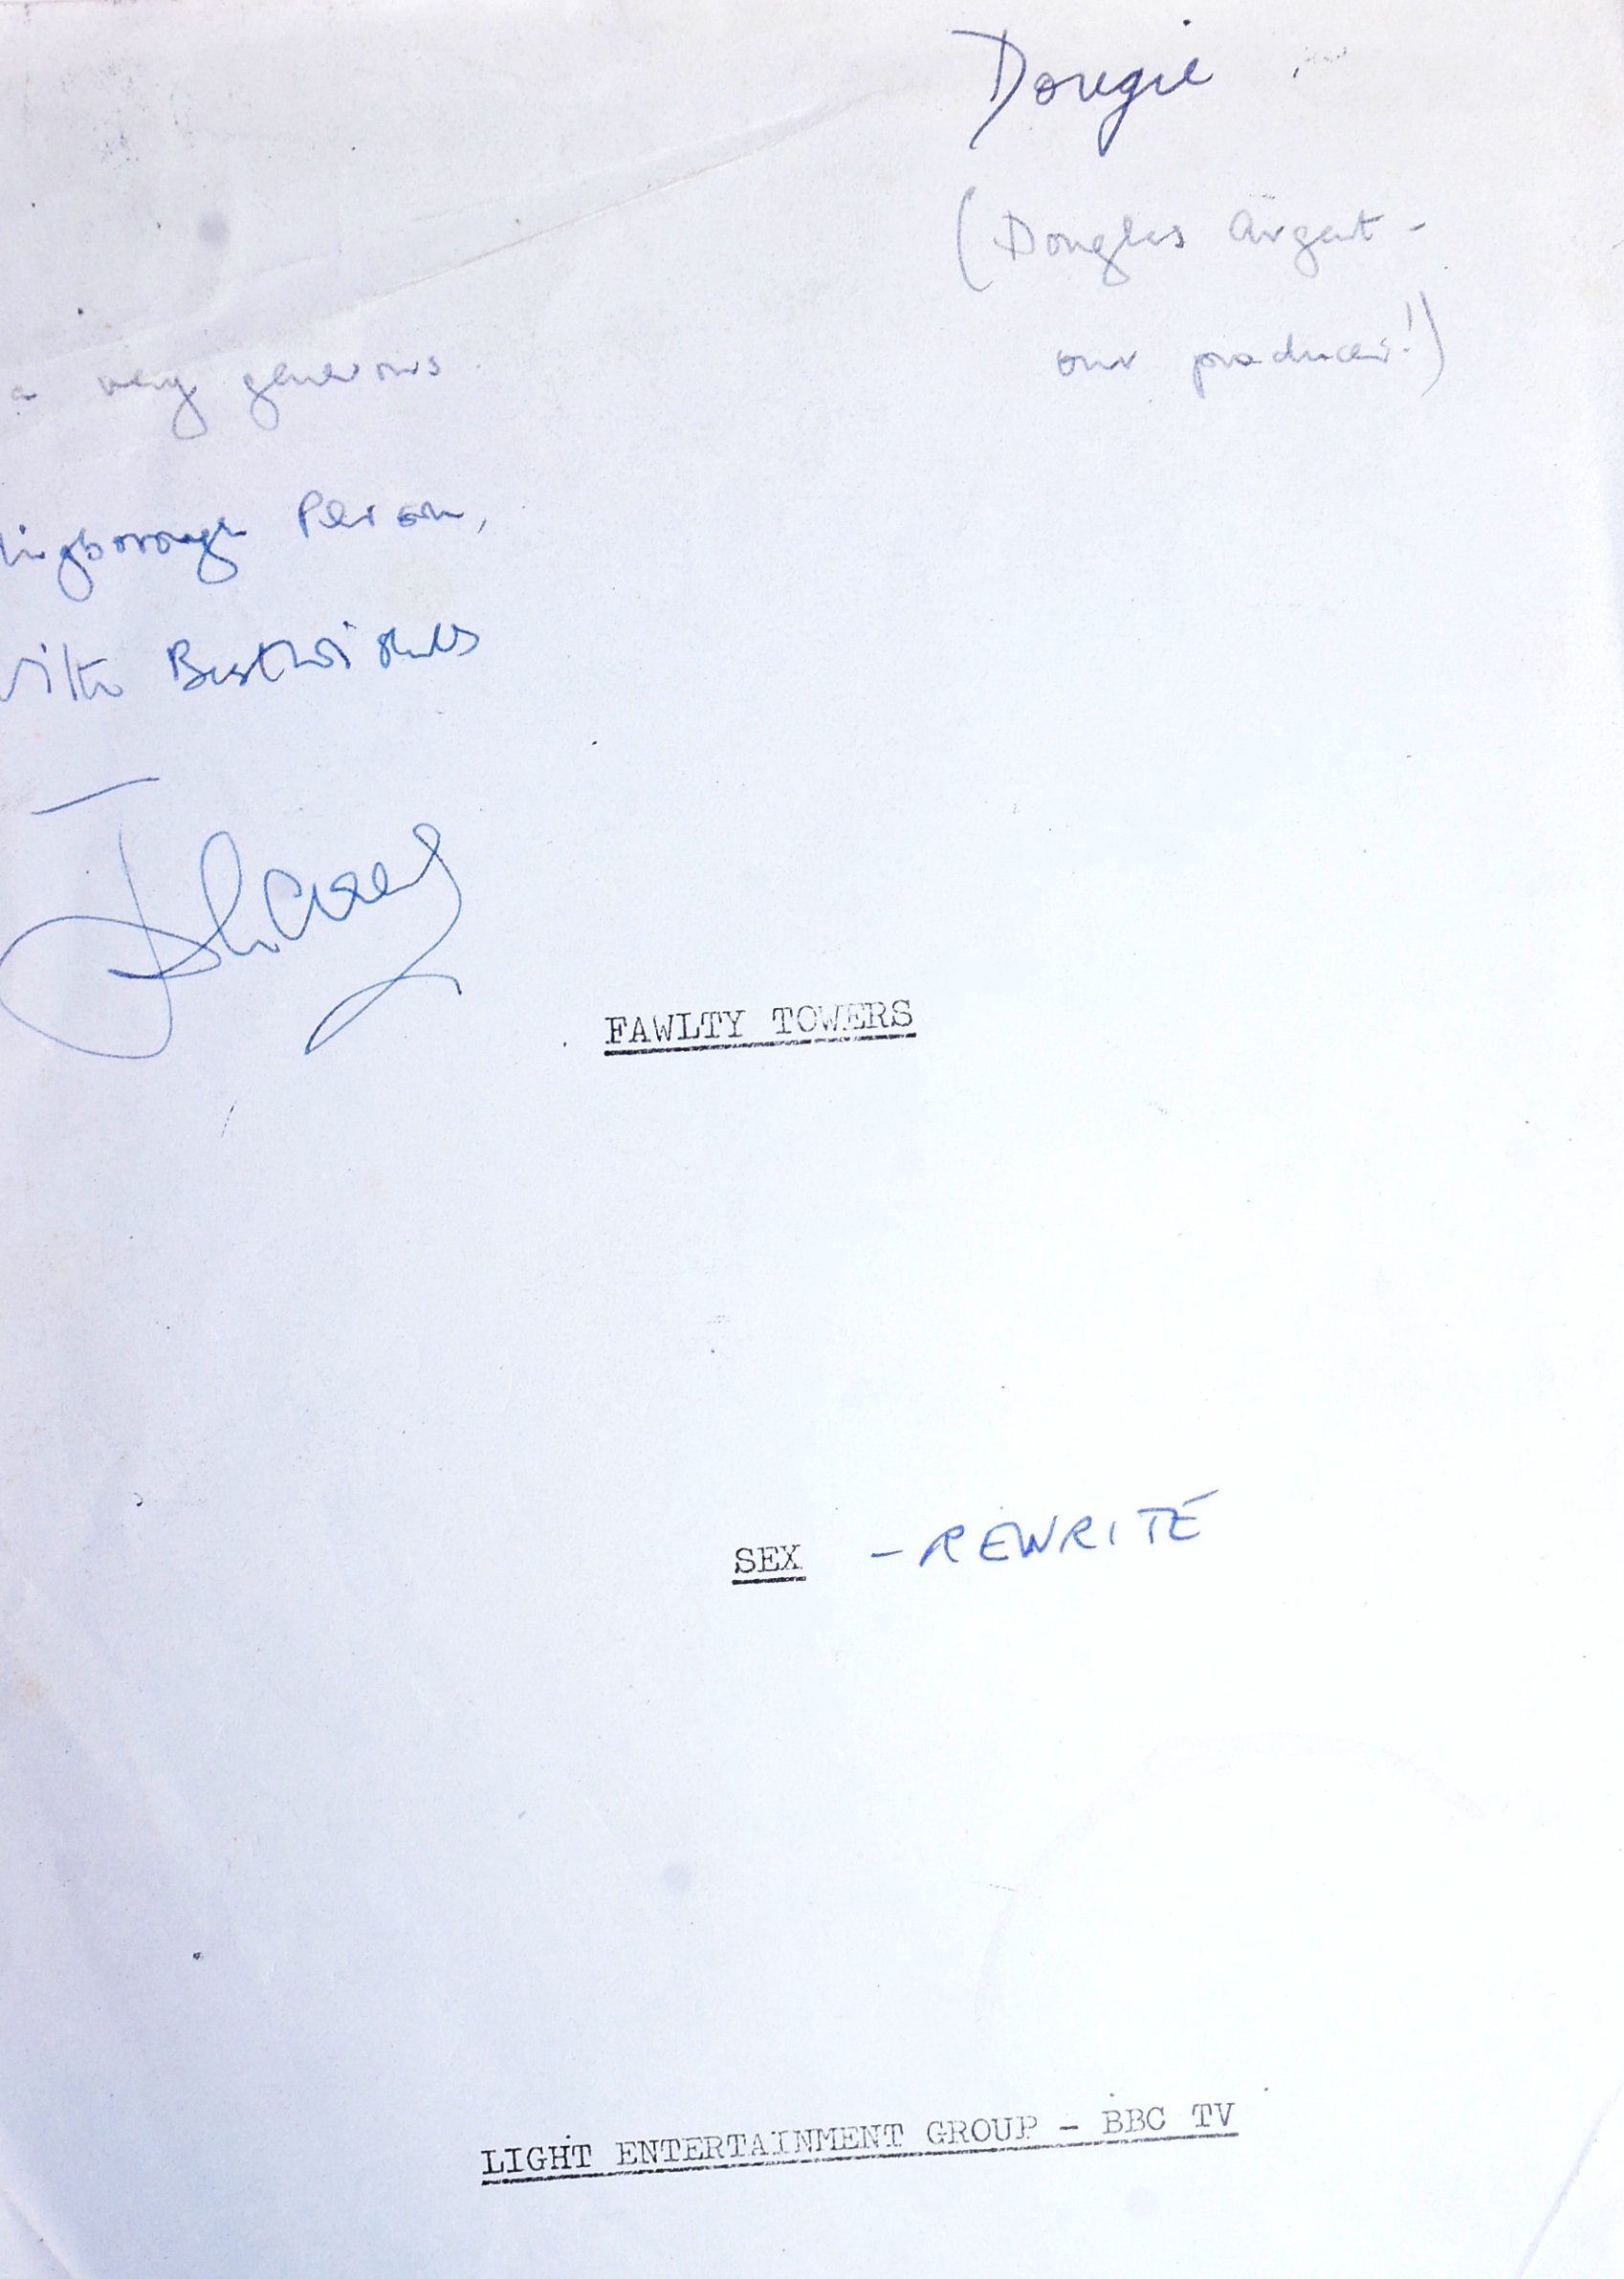 FAWLTY TOWERS (BBC SITCOM) - ORIGINAL PRODUCTION SCRIPT - Image 3 of 5